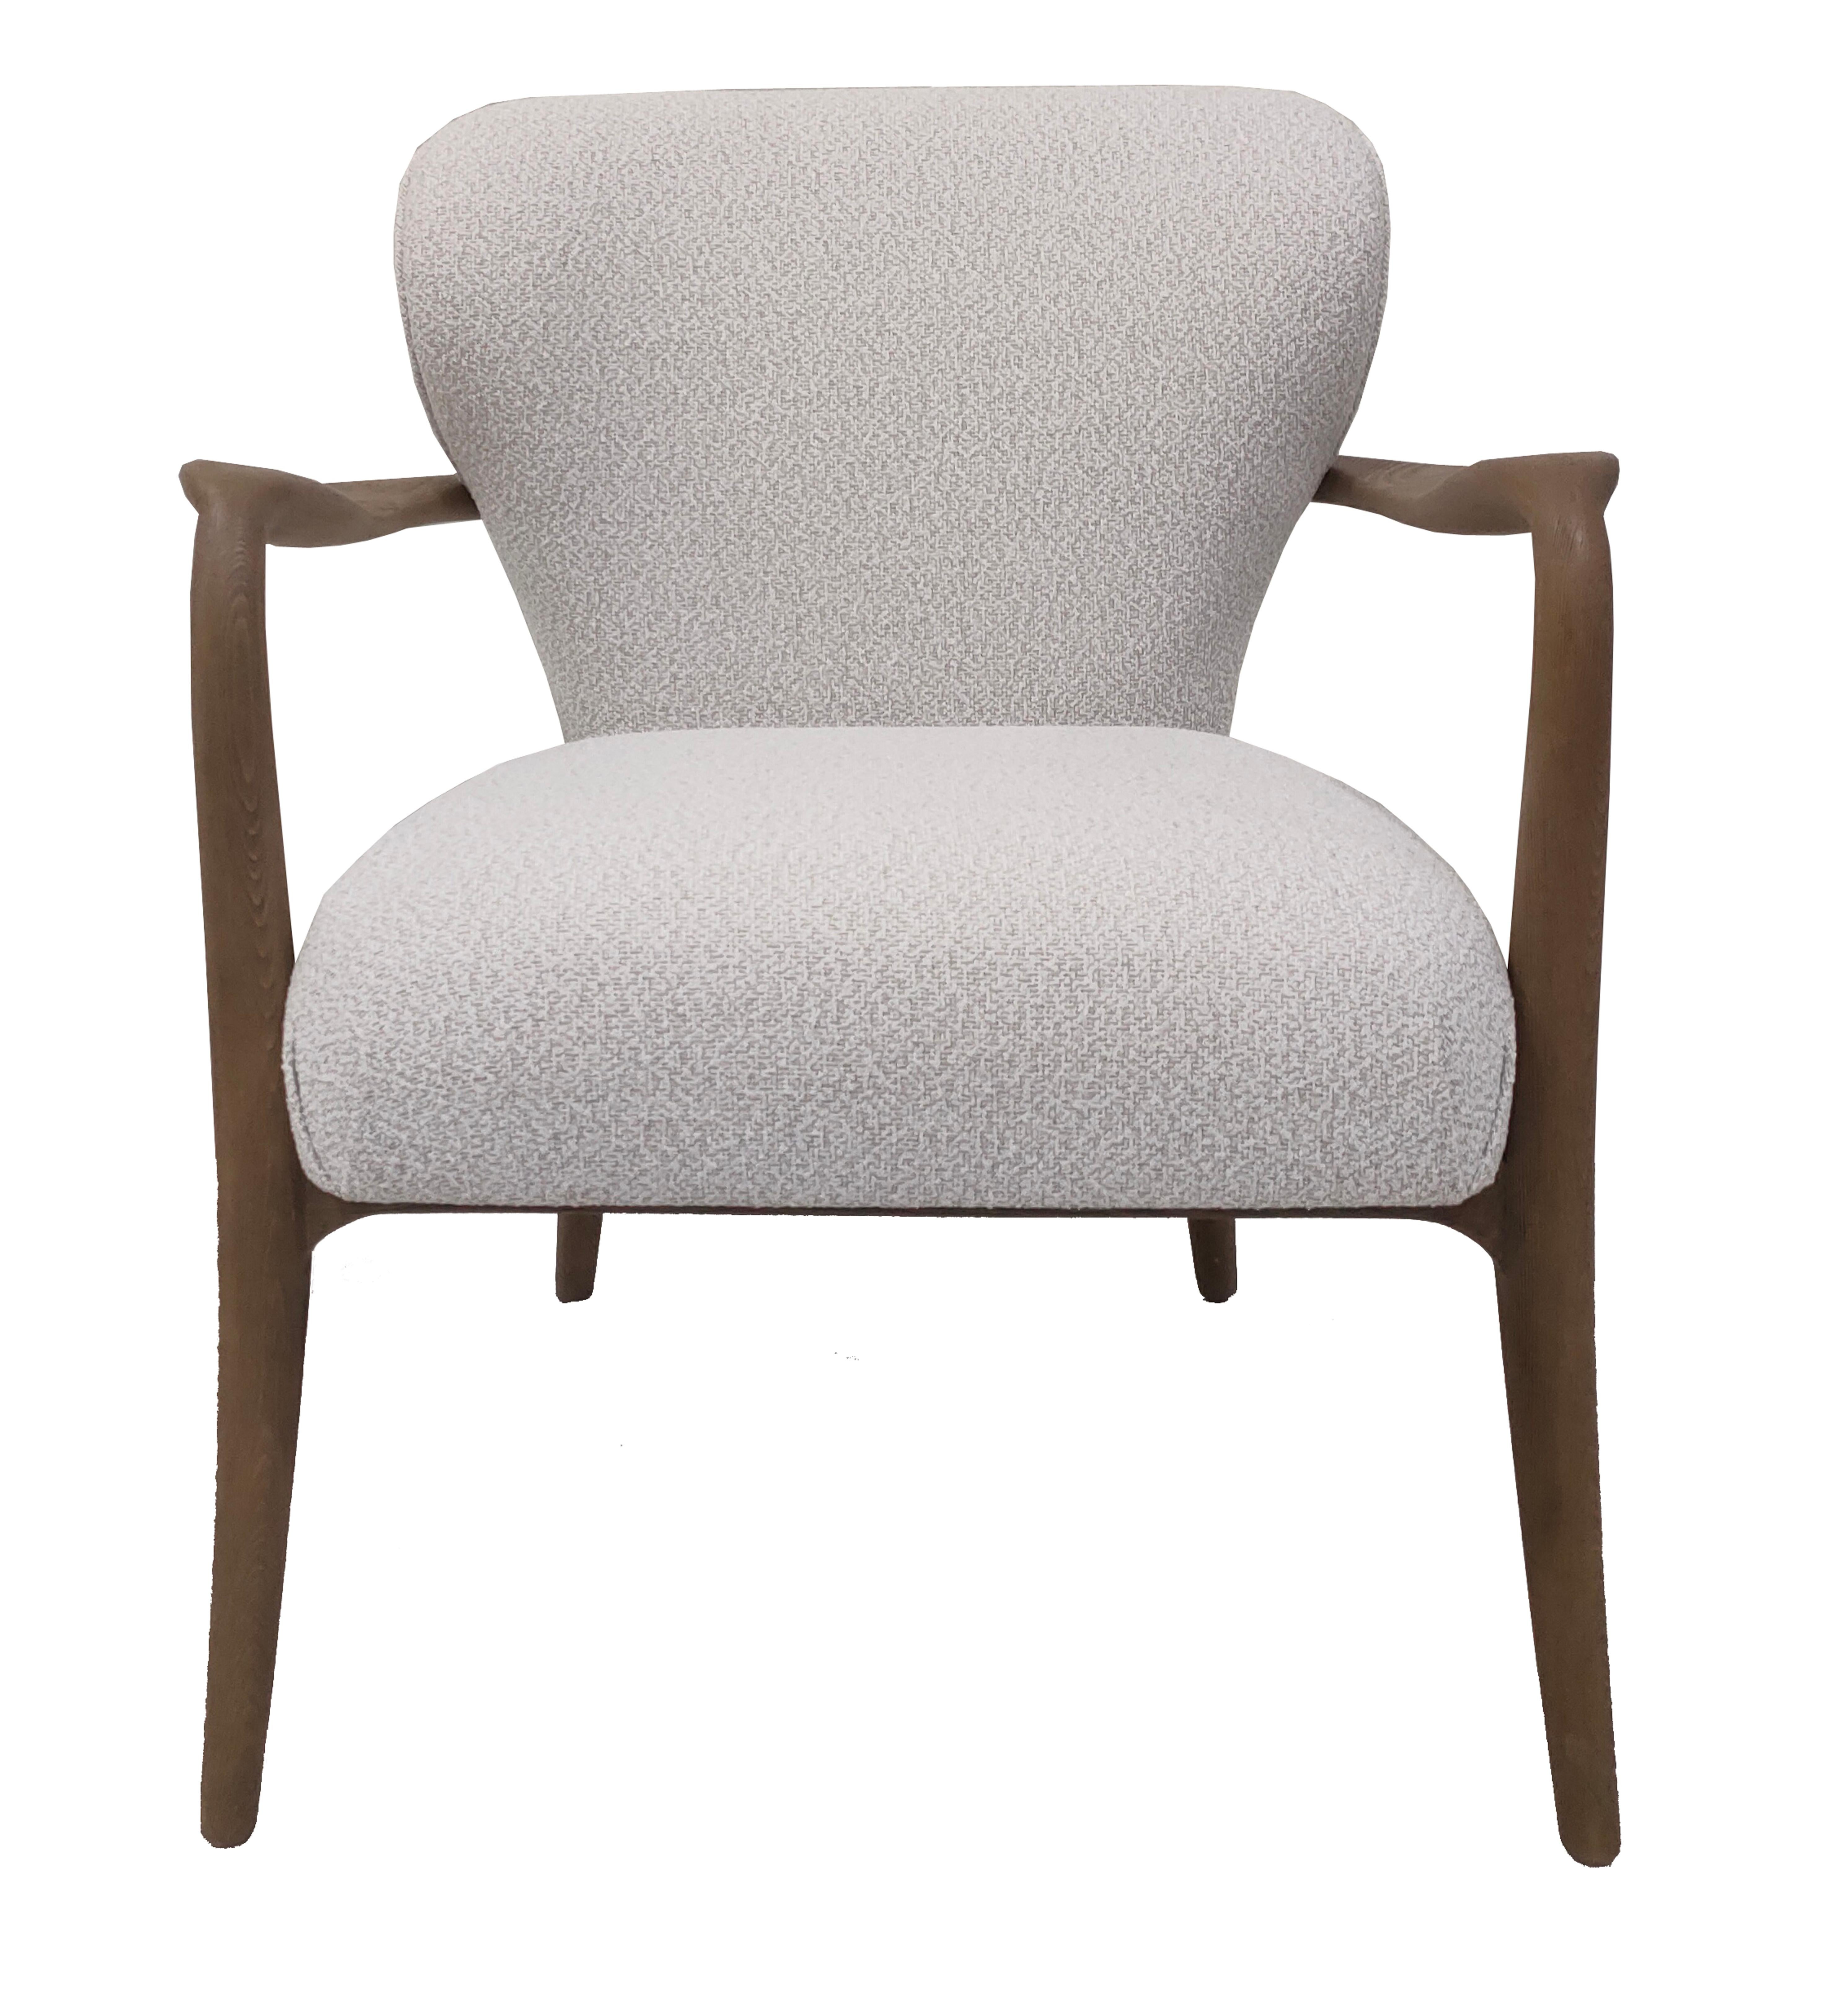 Description: Armchair with cushion in pinewood with Loro Piana fabric
Color: Grey and shaded white
Size: 72 x 76 x 83 H cm
Material: Pinewood and Loro Piana fabric
Collection: Art Déco Garden.